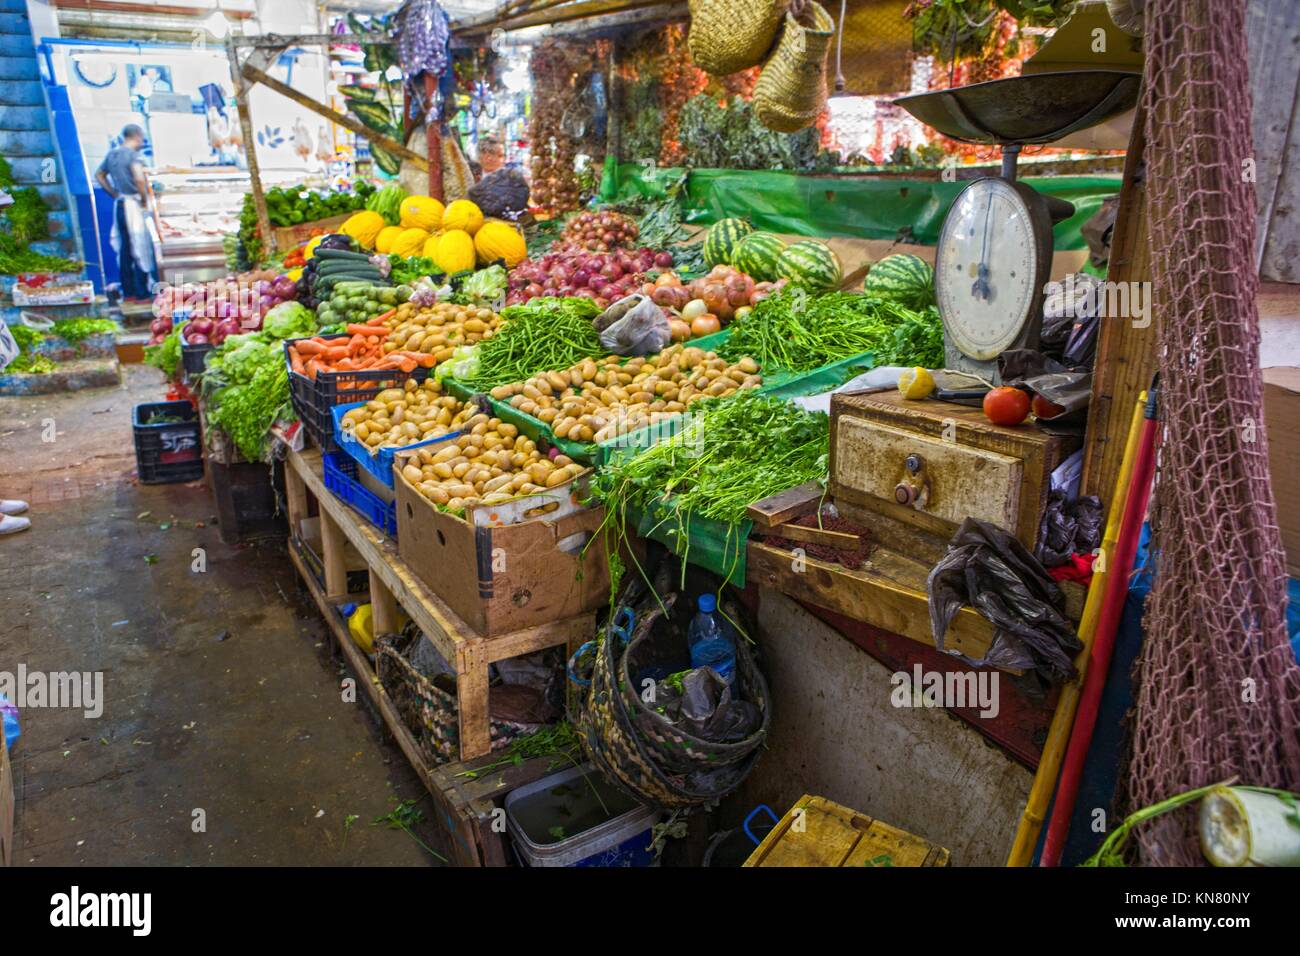 Old balance at grocery stall, Tangier, Morocco. Stock Photo